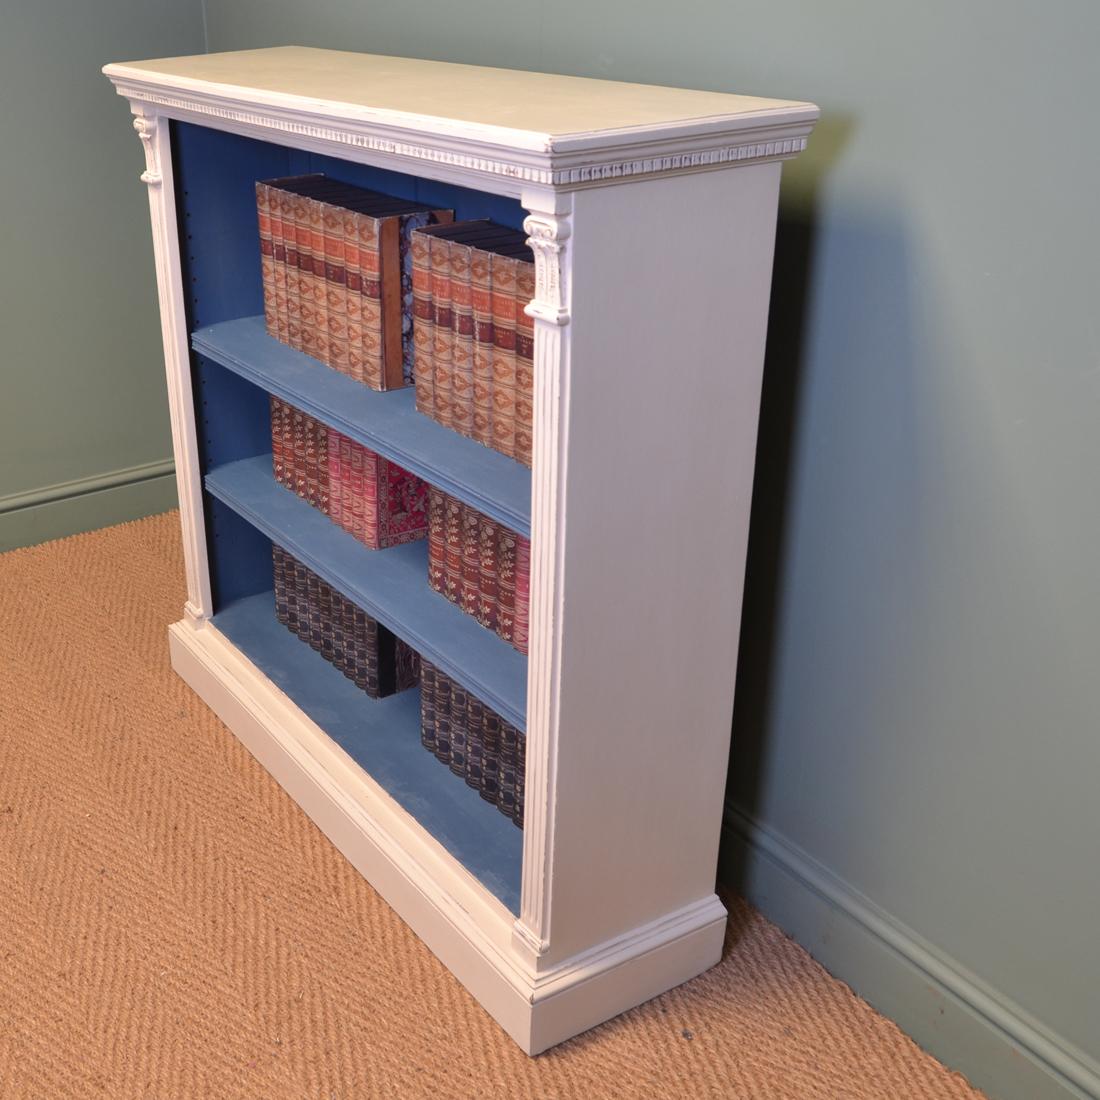 Stunning Victorian quality antique painted open bookcase

This stunning painted open bookcase circa 1880 has a rectangular moulded top with dental moulding above two adjustable shelves and the sides have moulded pilasters with quality carvings.